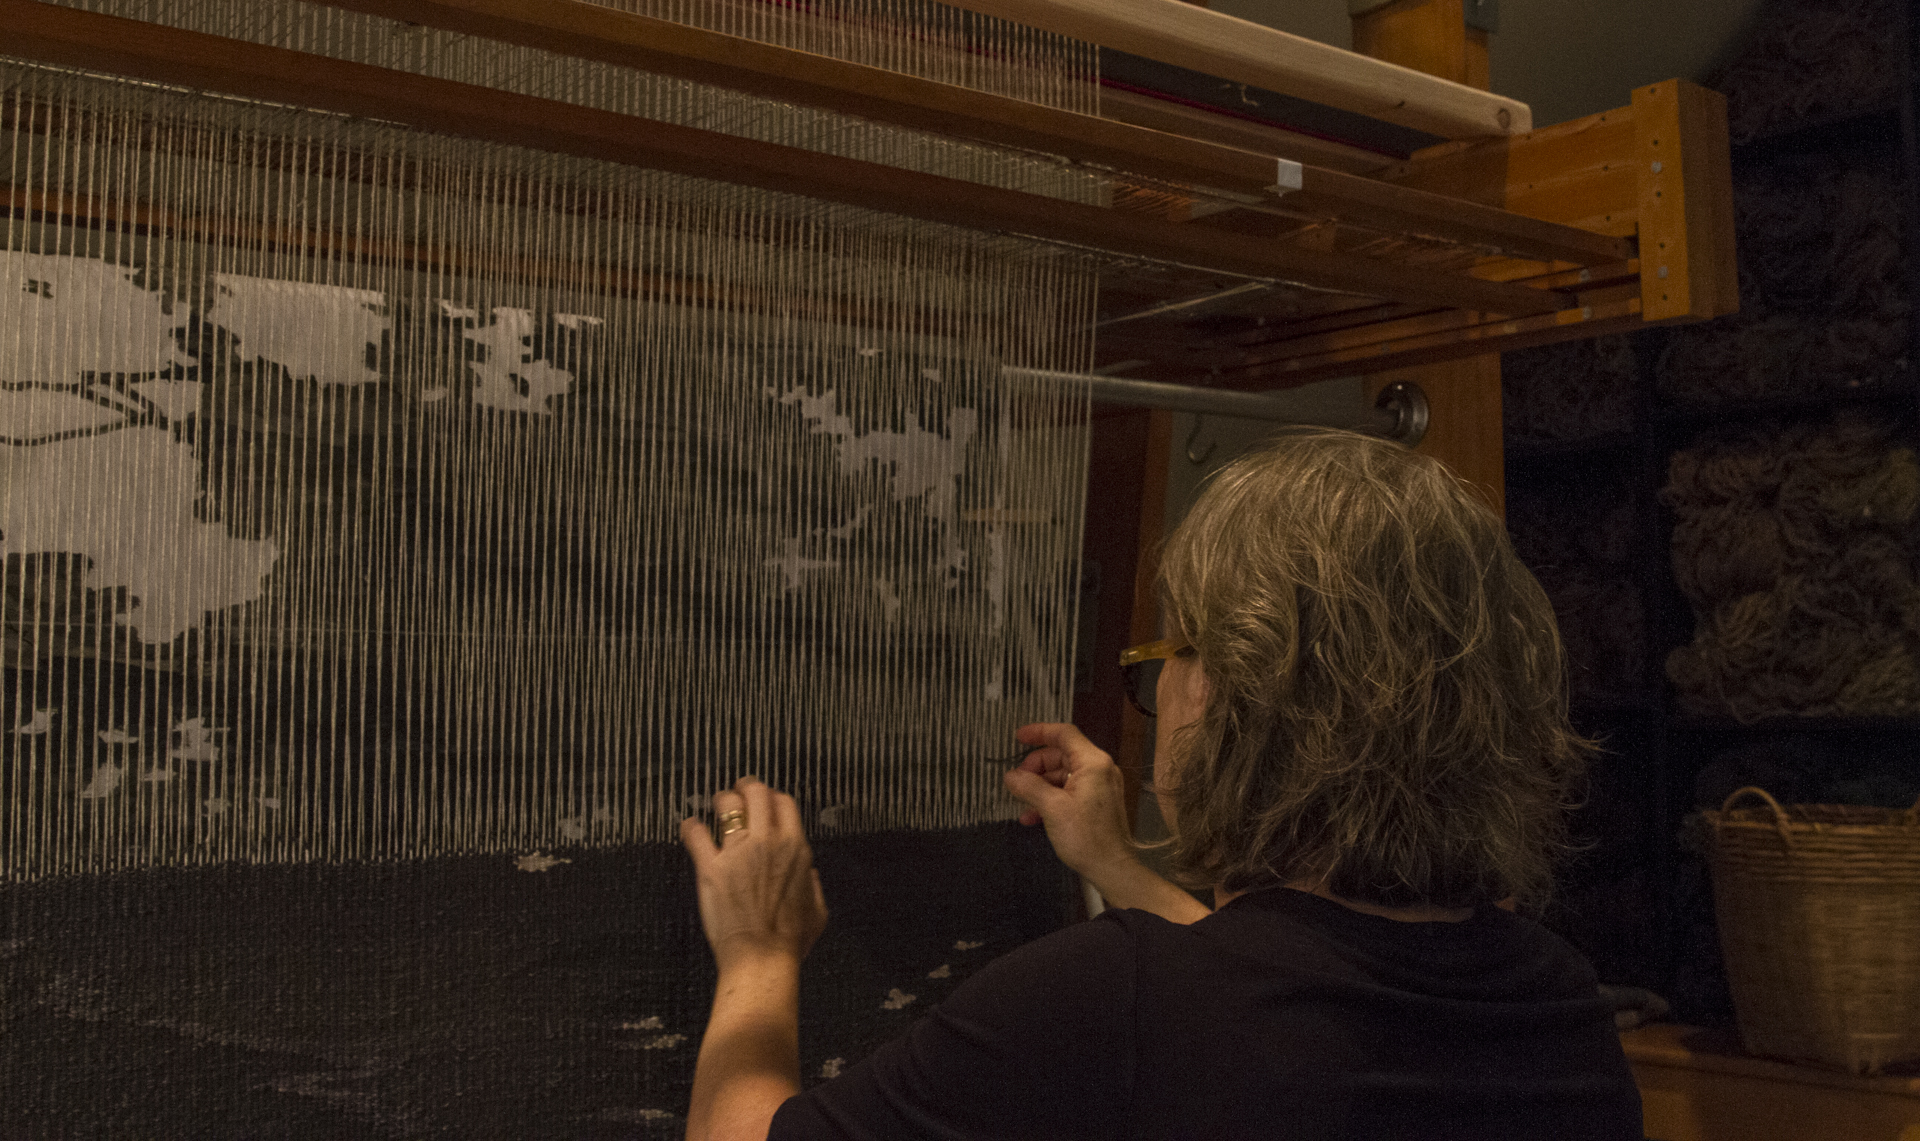 Lyn Sterling Montagne working on a linen tapestry on a vertical tapestry loom in her Atlanta studio, fall 2016